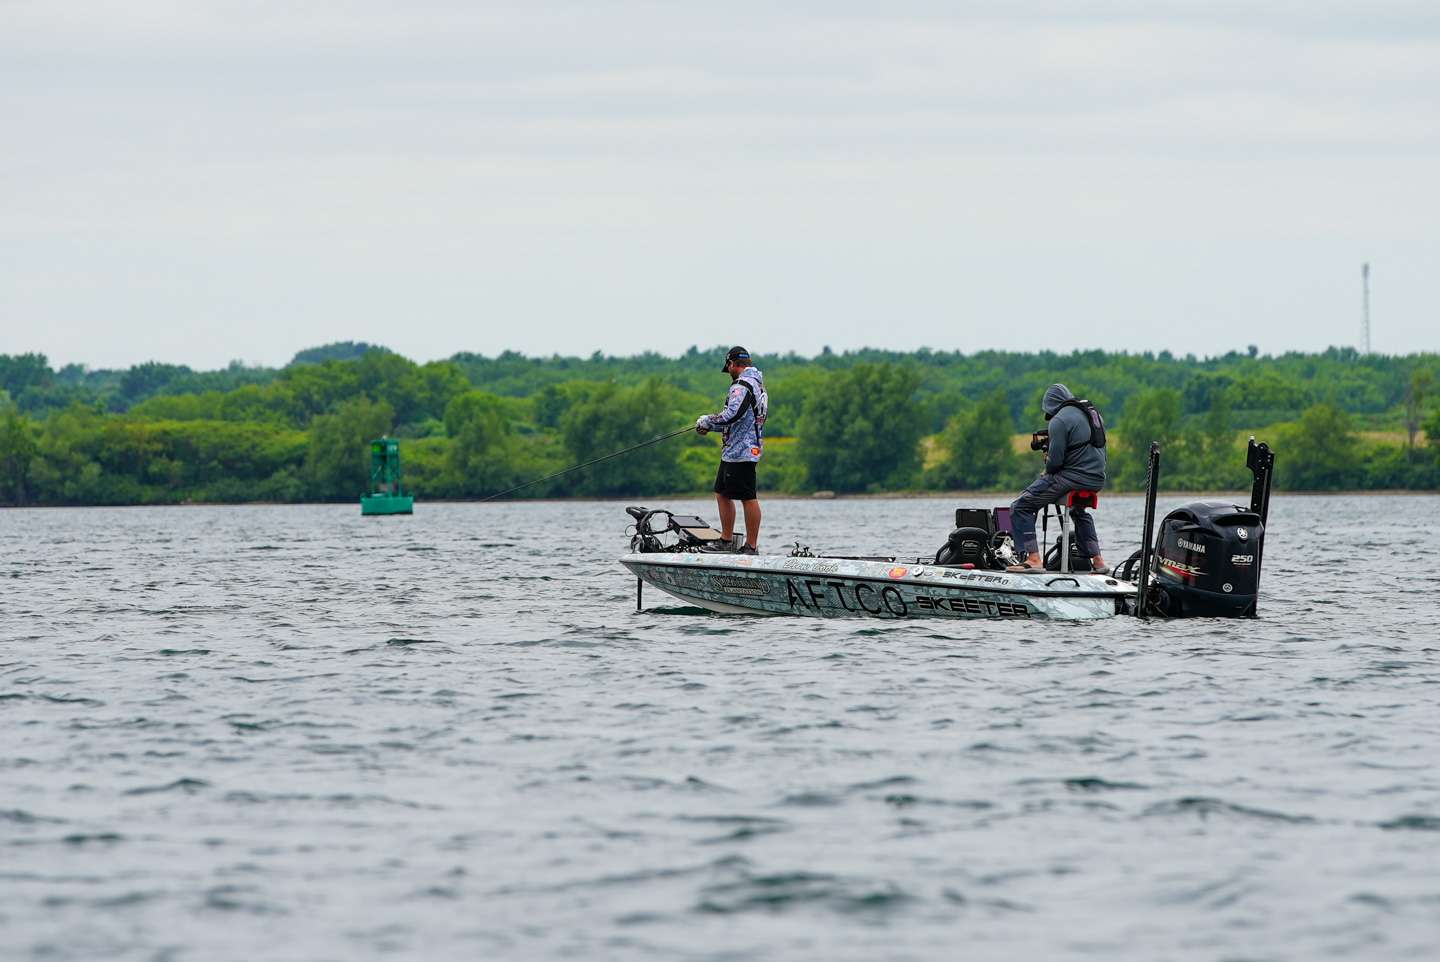 Catch up with Drew Cook and Harvey Horne as they bring 'em in late Day 2 of the 2021 Farmers Insurance Bassmaster Elite at St. Lawrence River!